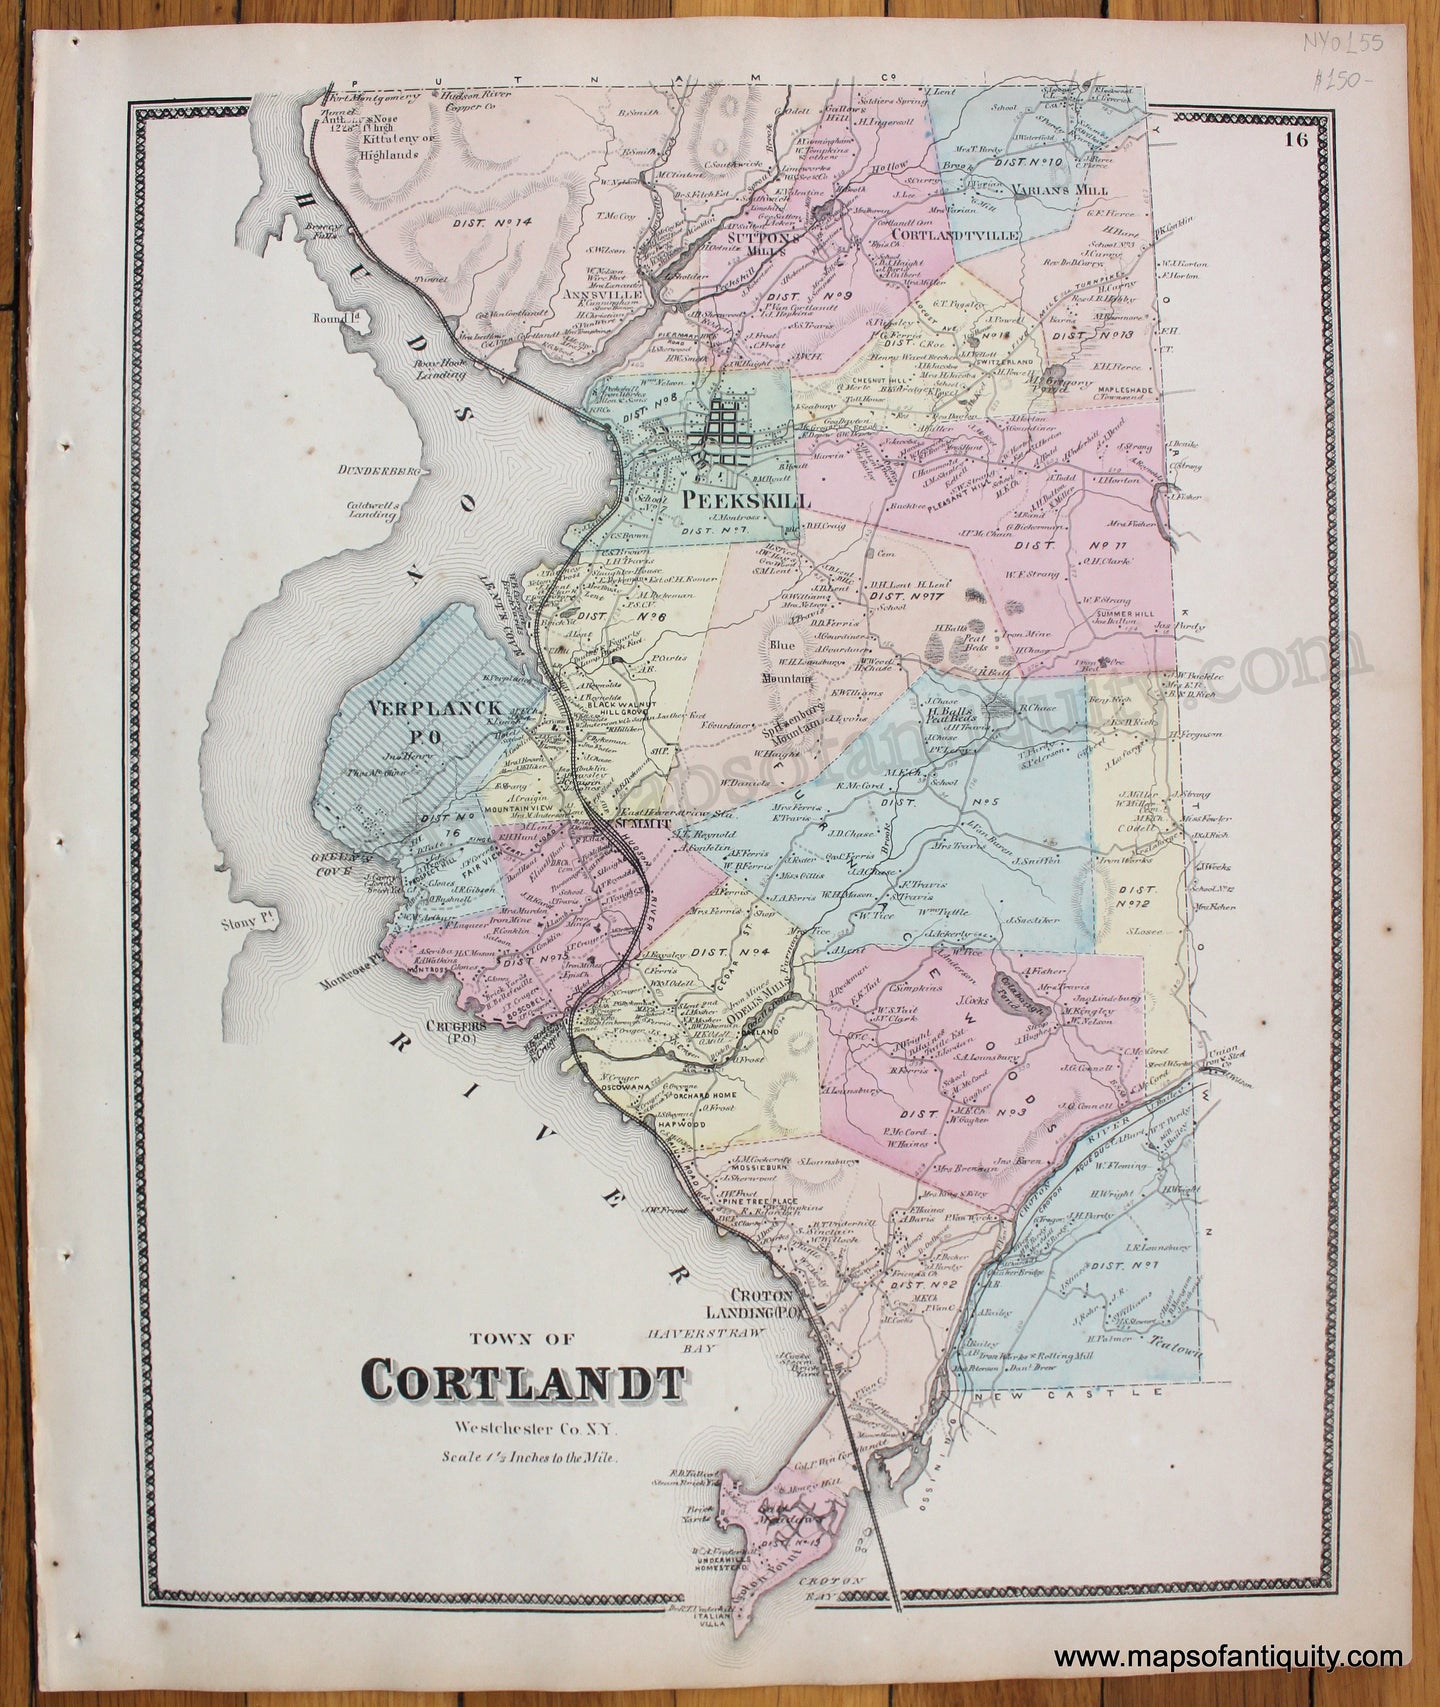 Antique-Hand-Colored-Map-Town-of-Cortlandt-Westchester-Co.-N.Y.--United-States-Northeast-1867-Beers-Maps-Of-Antiquity